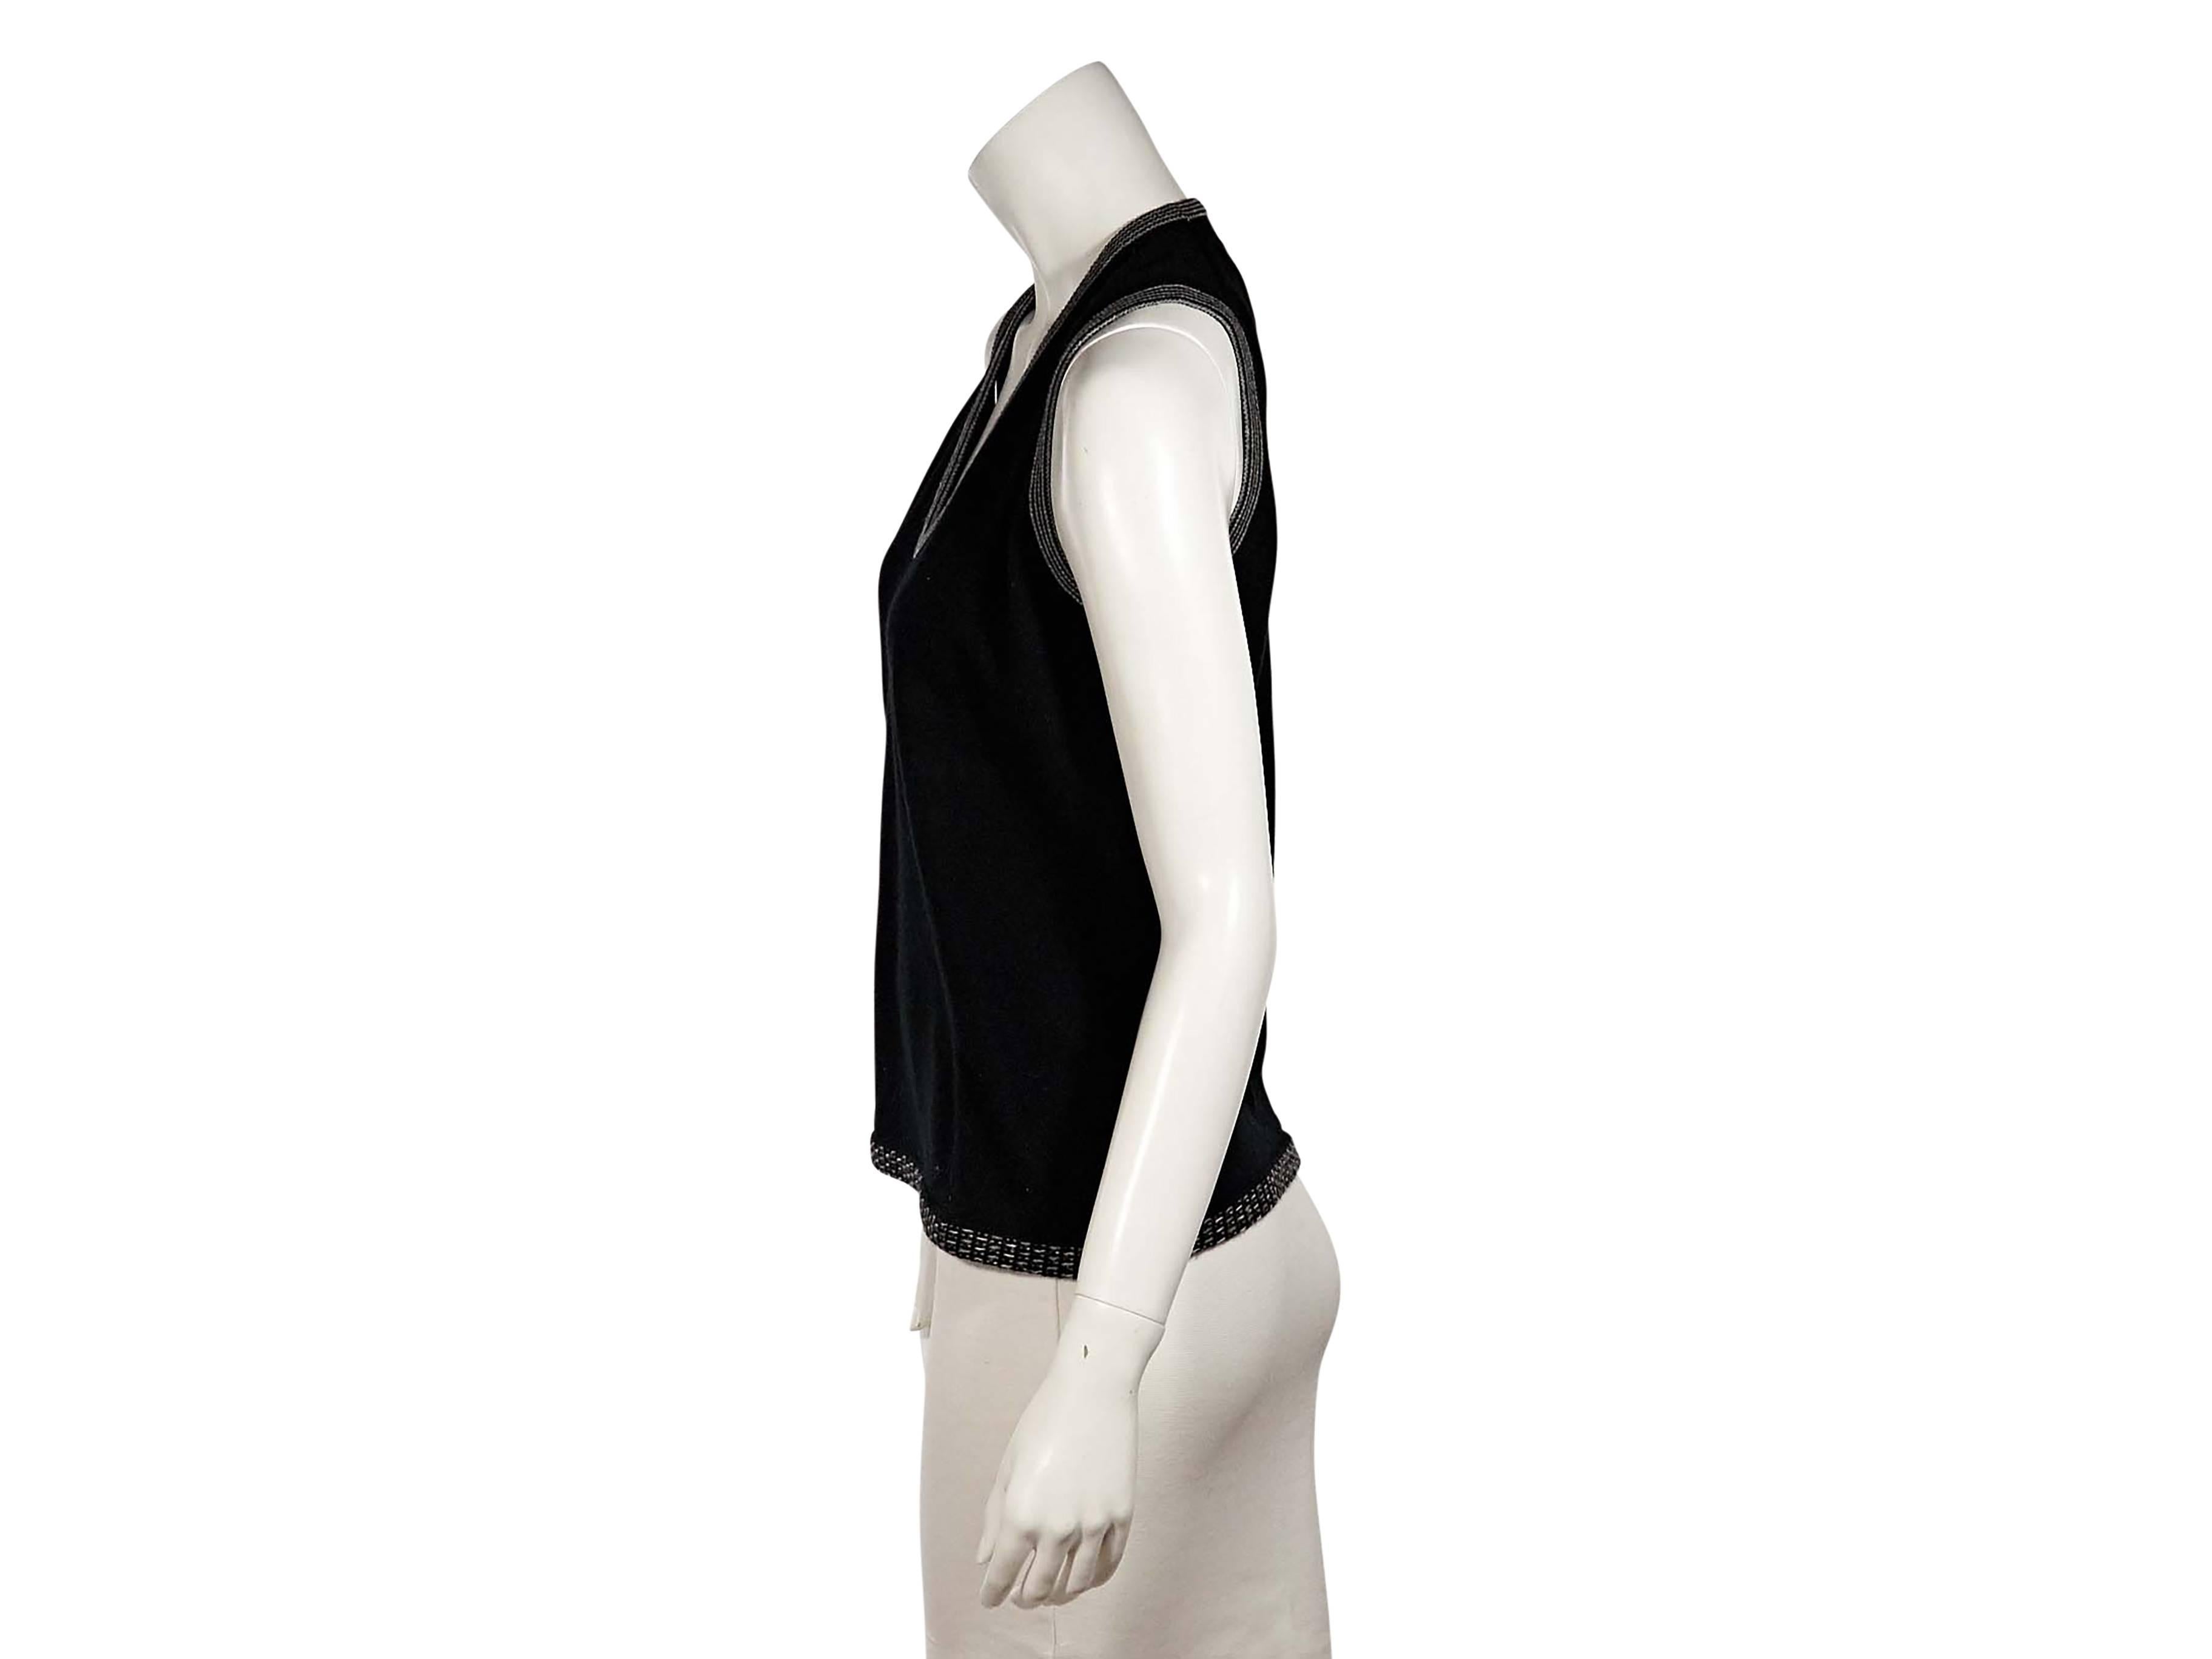 Product details:  Black knit sweater shell by Chanel.  Features contrast trim.  U-neck.  Sleeveless.  Pullover style.  Label size FR 44.  
Condition: Excellent. 
Est. Retail $ 748.00